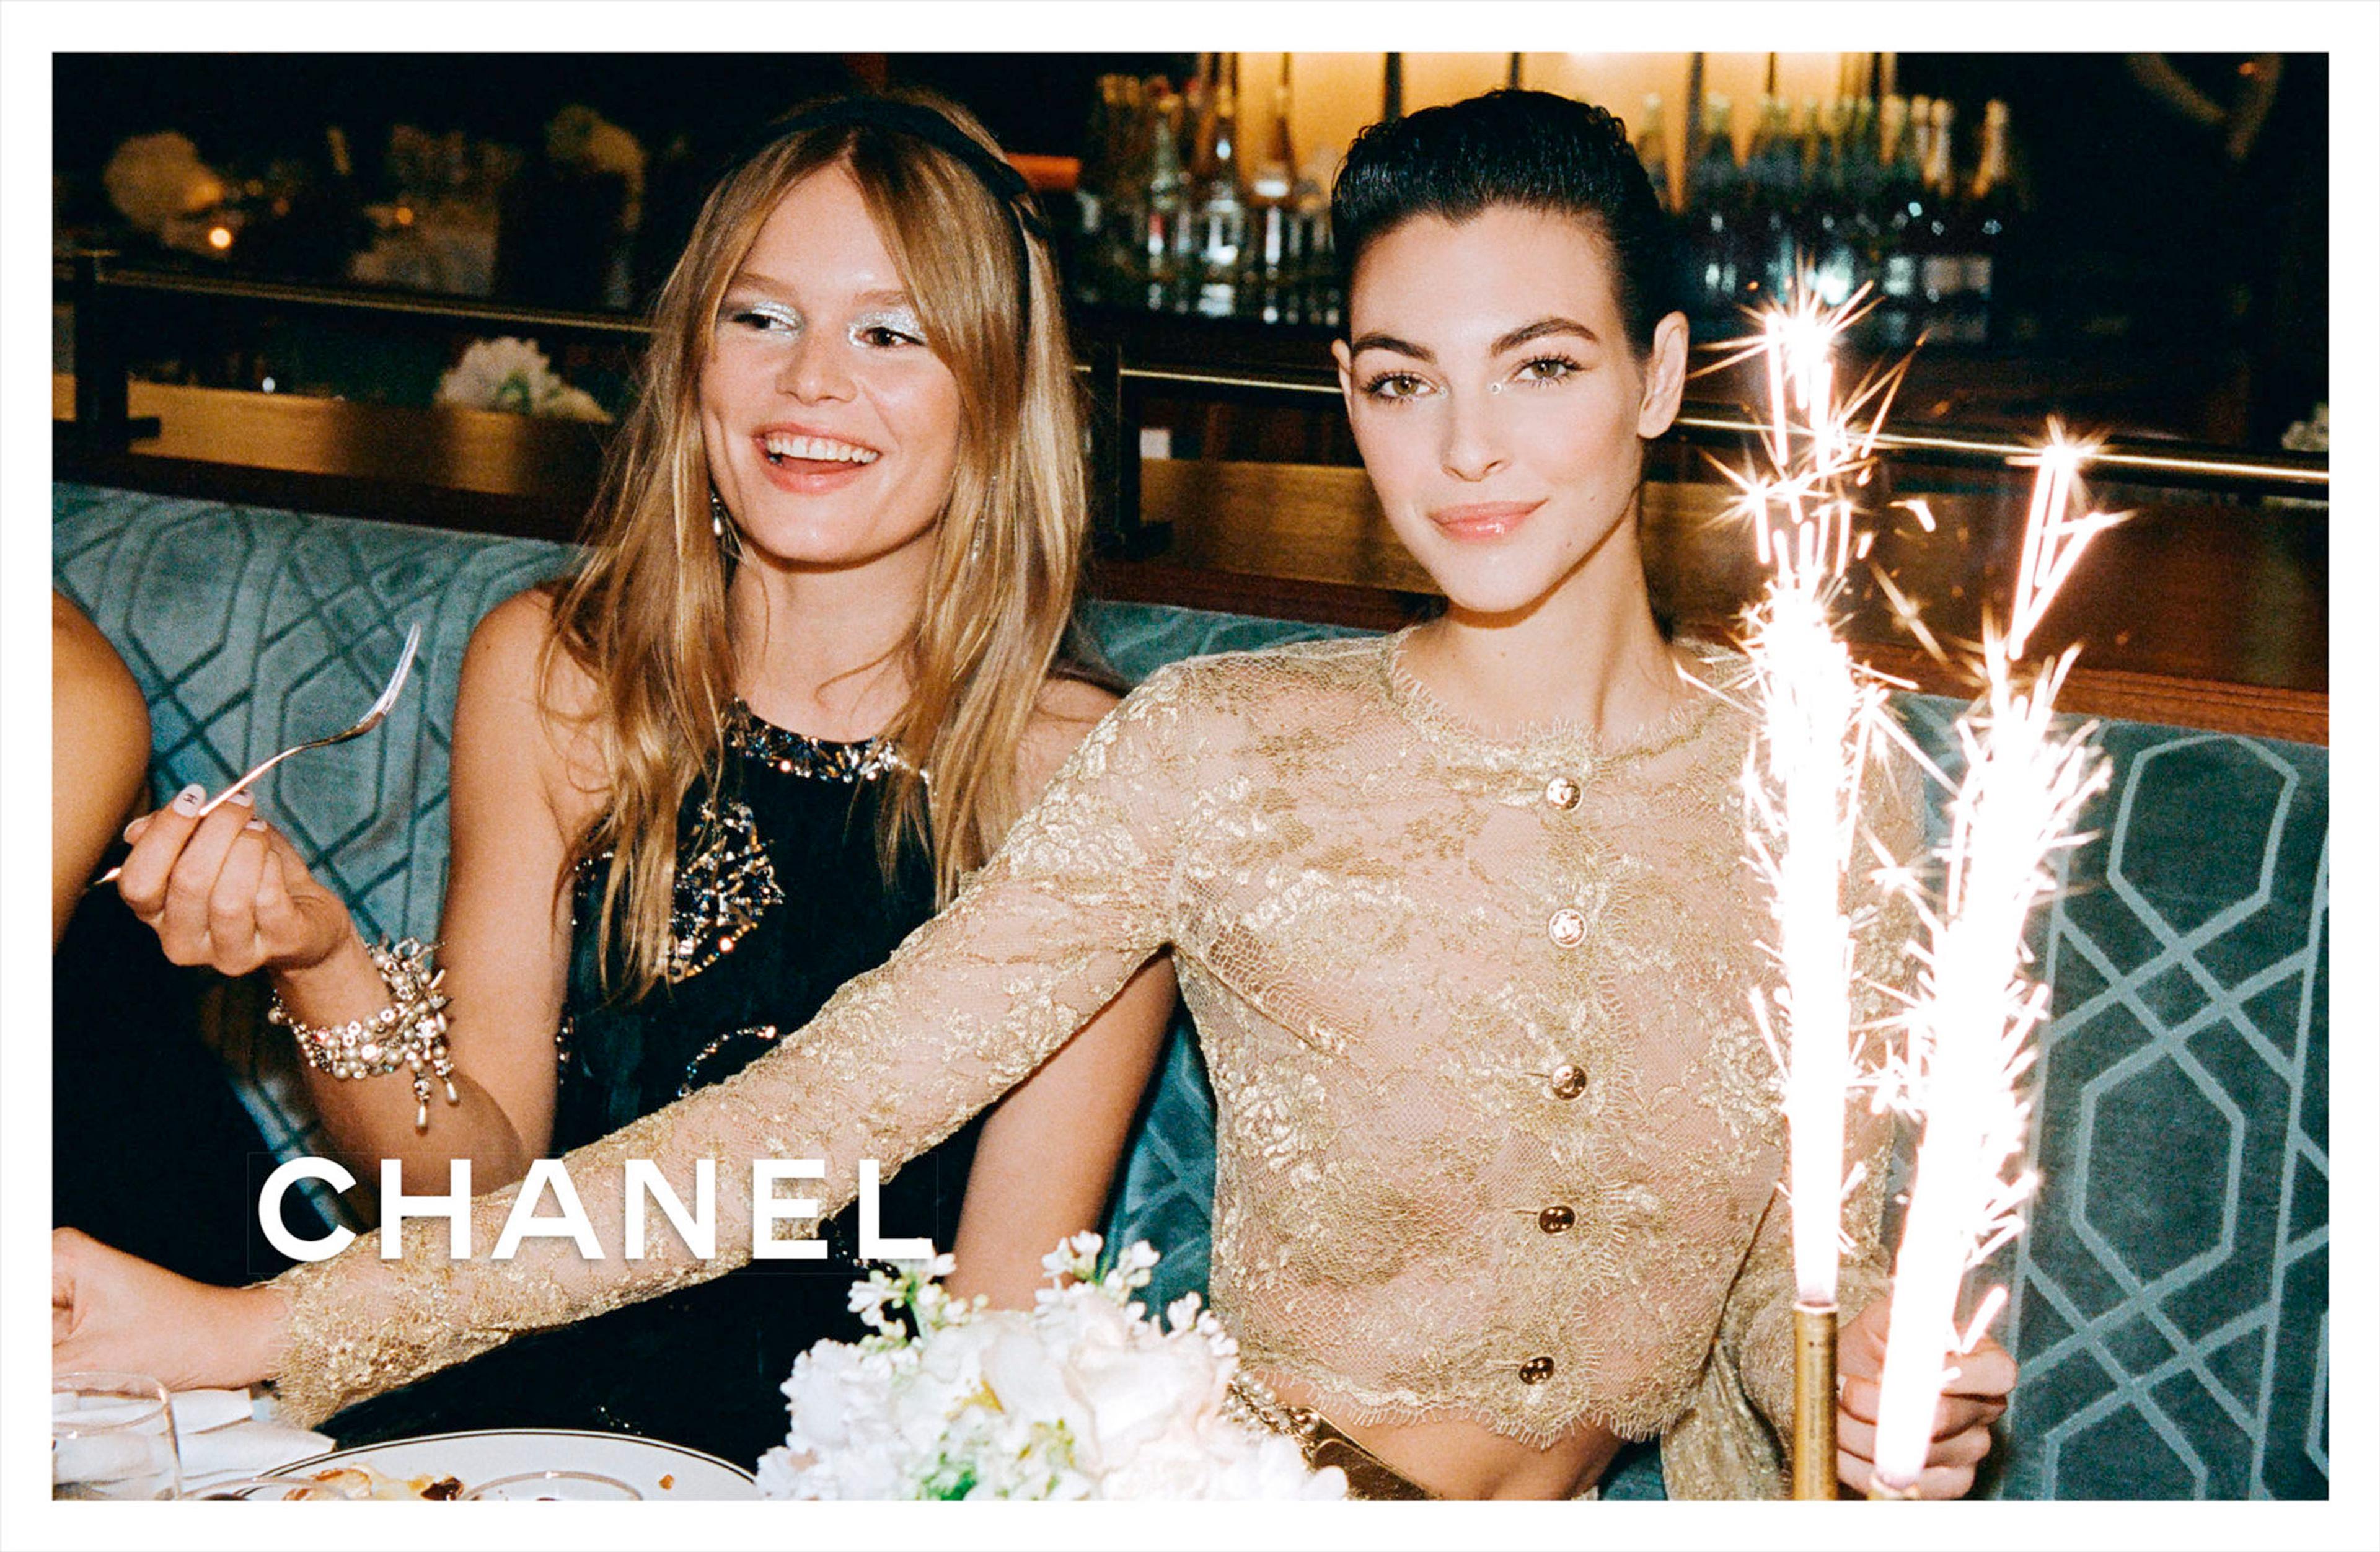 Image from Chanel